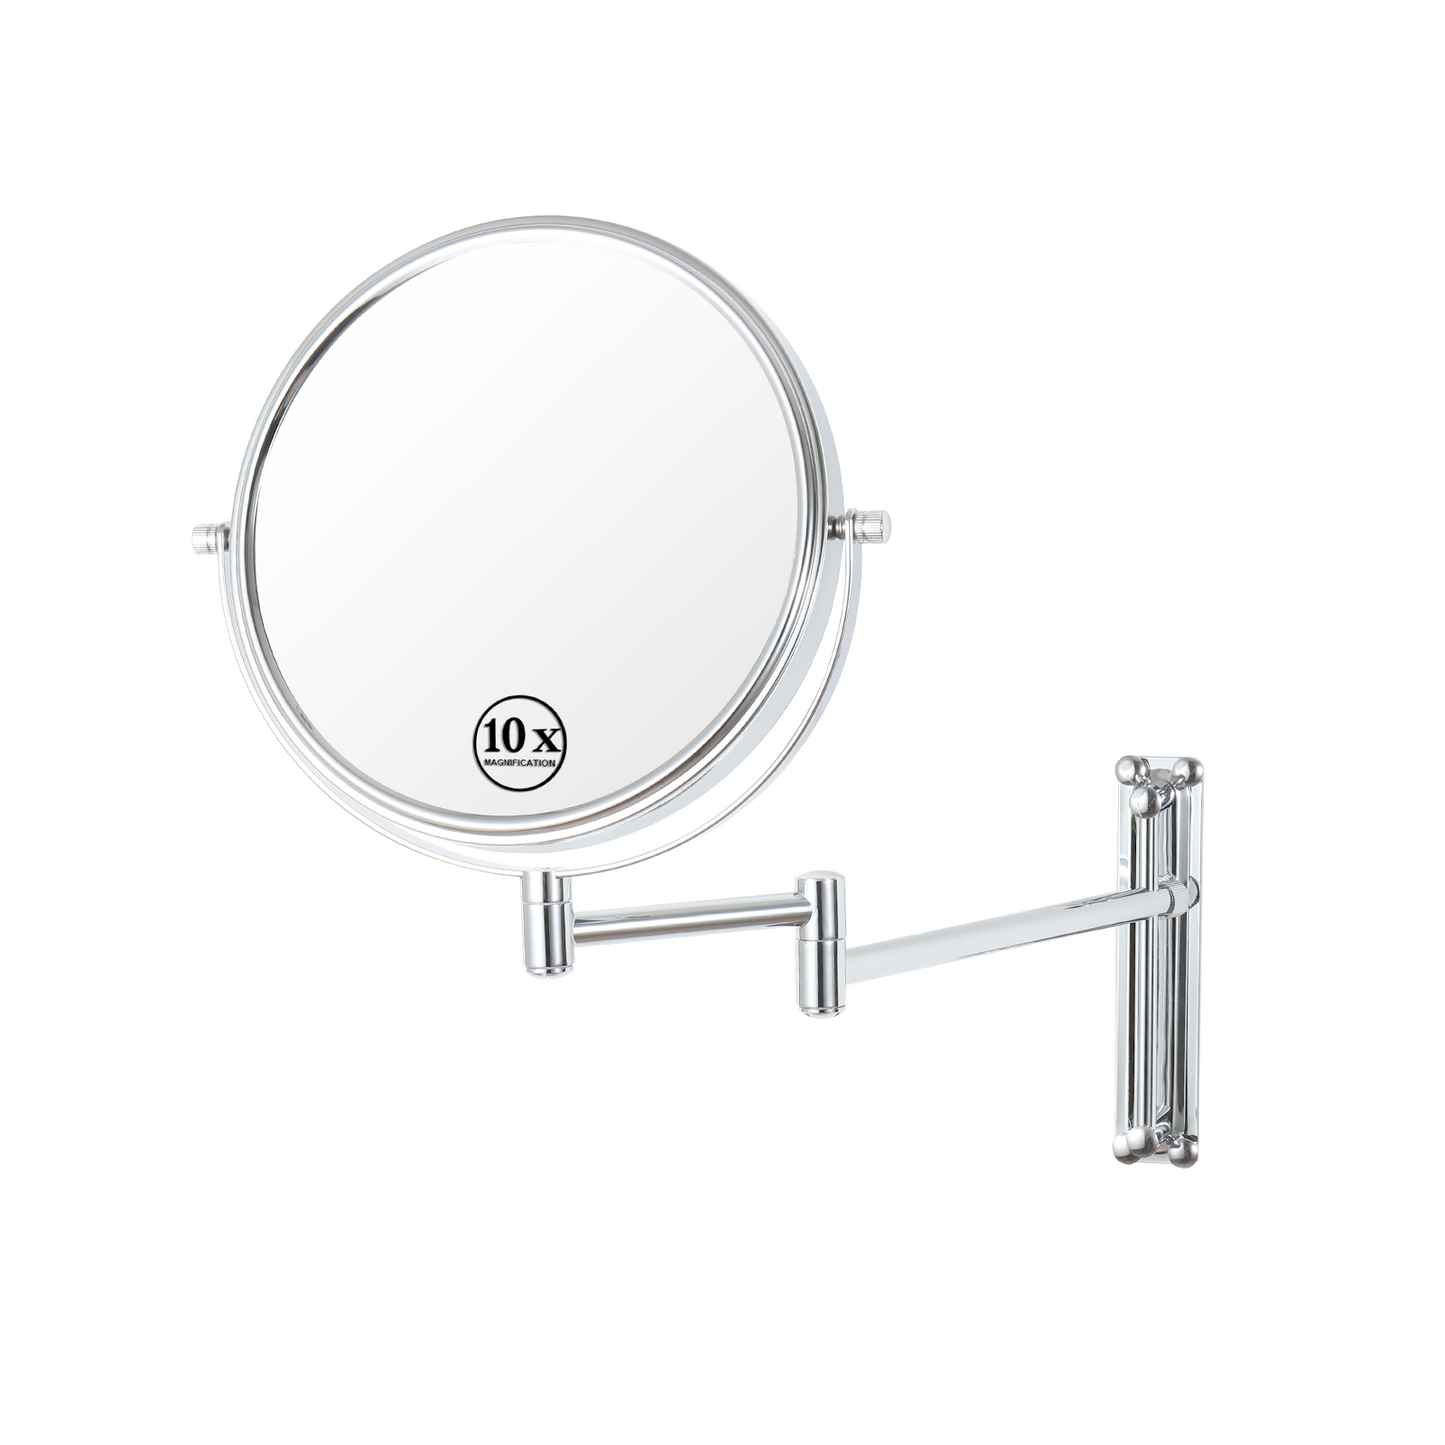 8-inch Wall Mounted Makeup Vanity Mirror, Height Adjustable, 1X / 10X Magnification Mirror, 360° Swivel with Extension Arm (Chrome Finish)